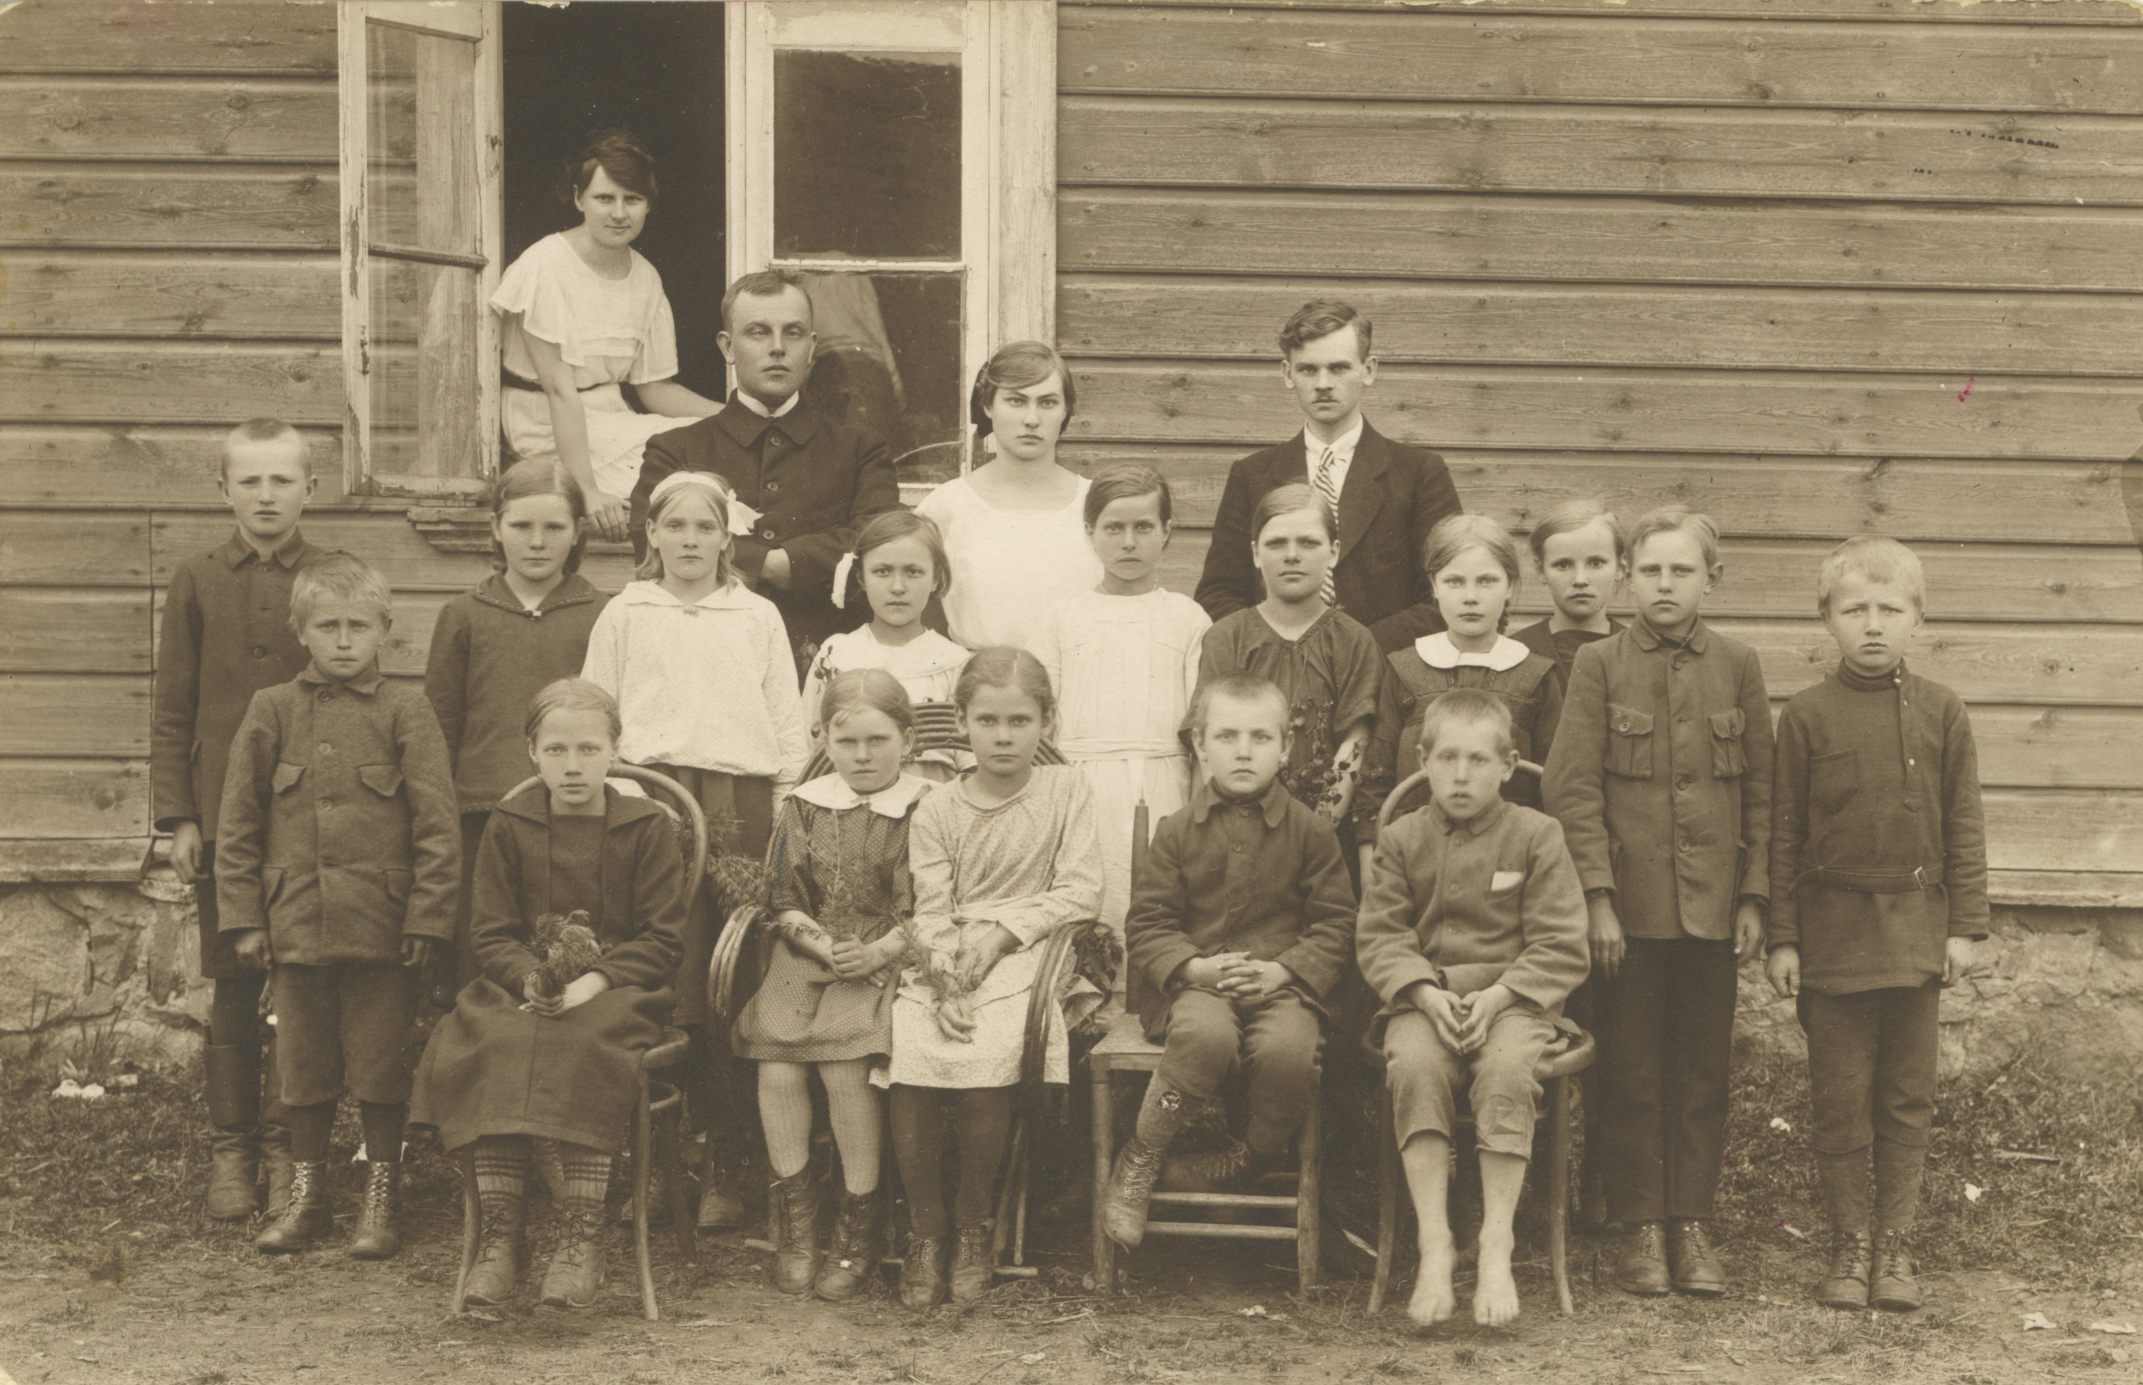 Hendrik Adamson with his students in 1923.